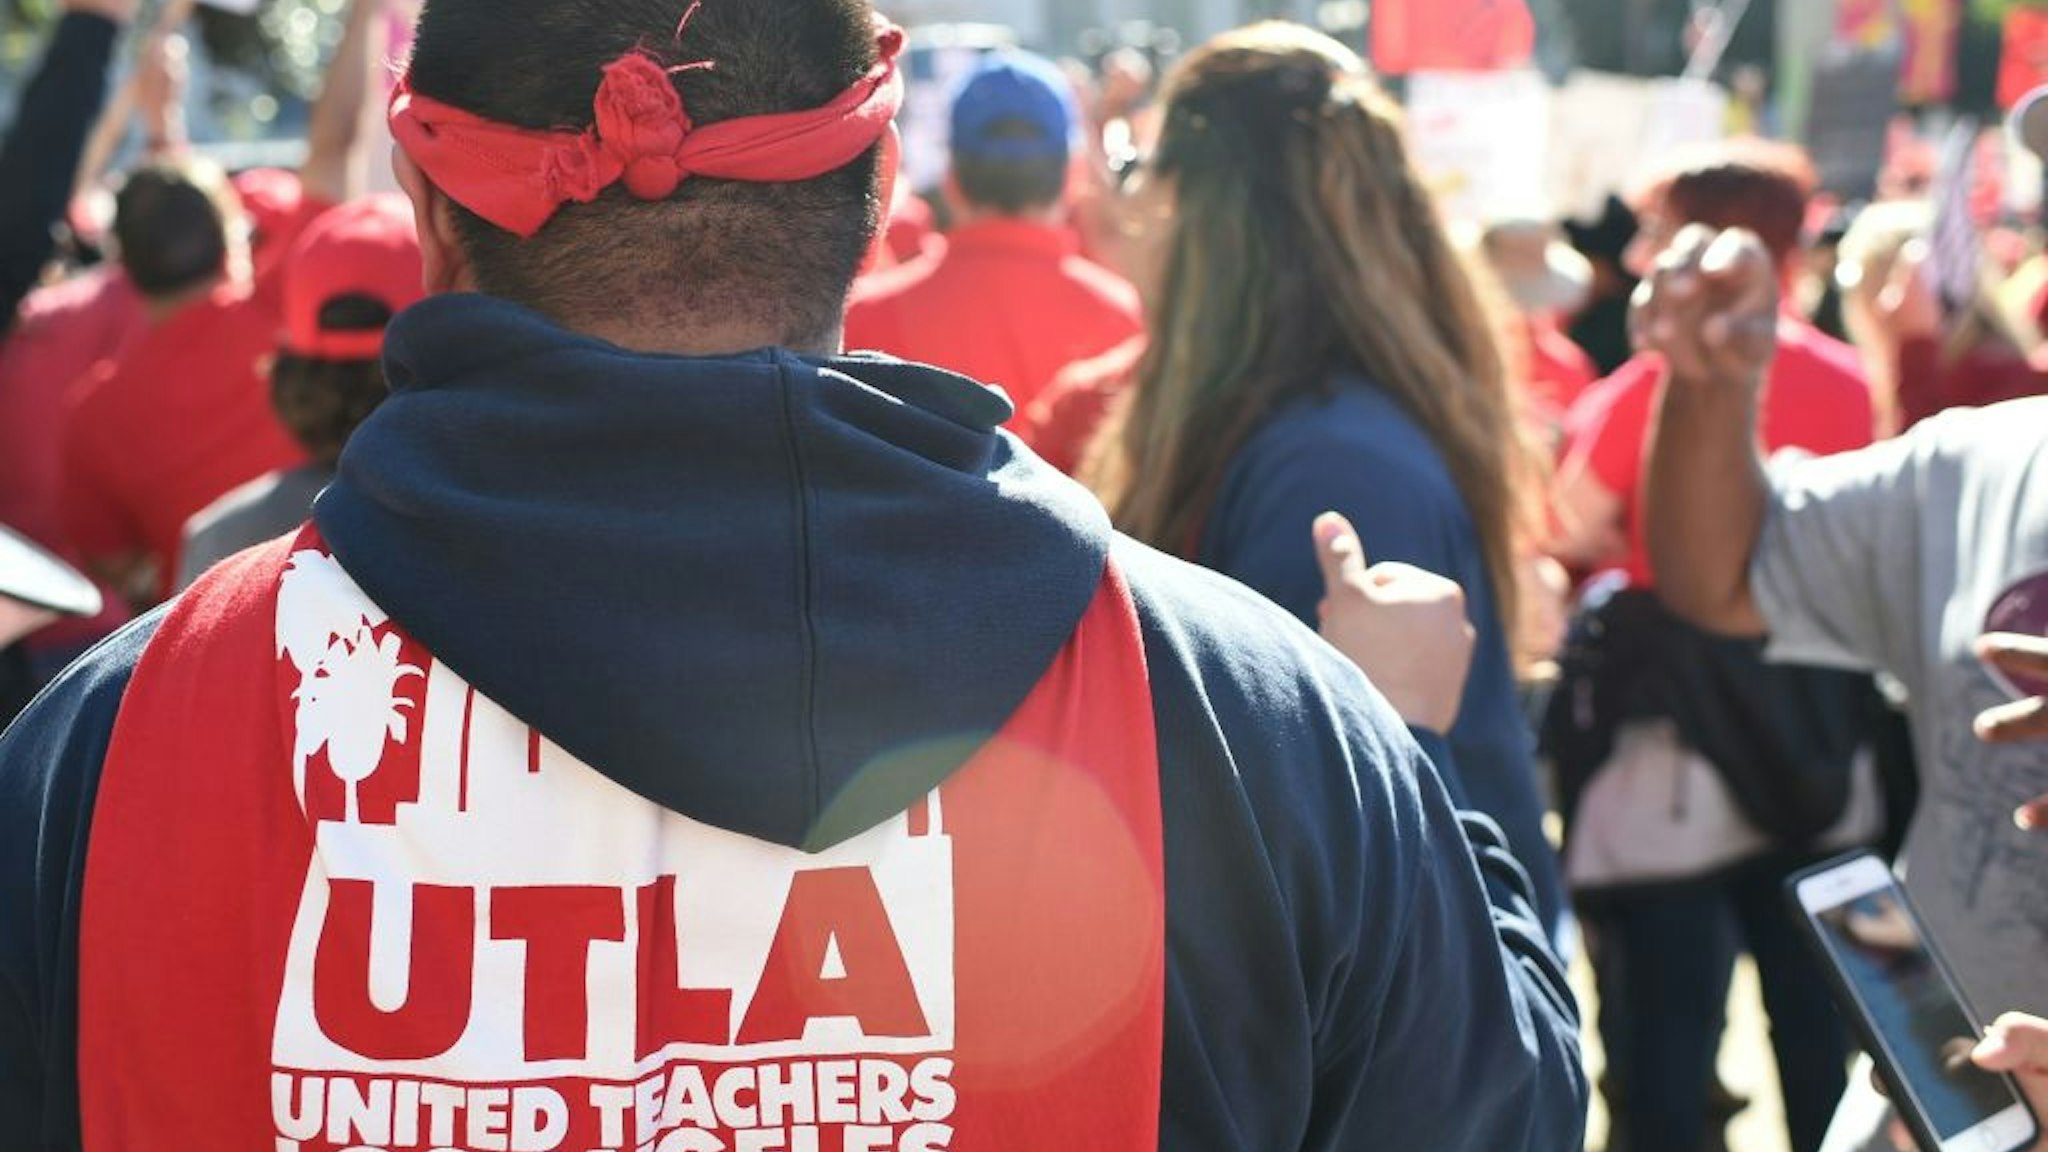 Striking teachers and supporters rally in Grand Park across from City Hall after the teacher's union reached a tentative deal with the Los Angeles Unified School District, on January 22, 2019 in Los Angles, California. - Union members have to vote on the agreement to end the strike which started on January 14.